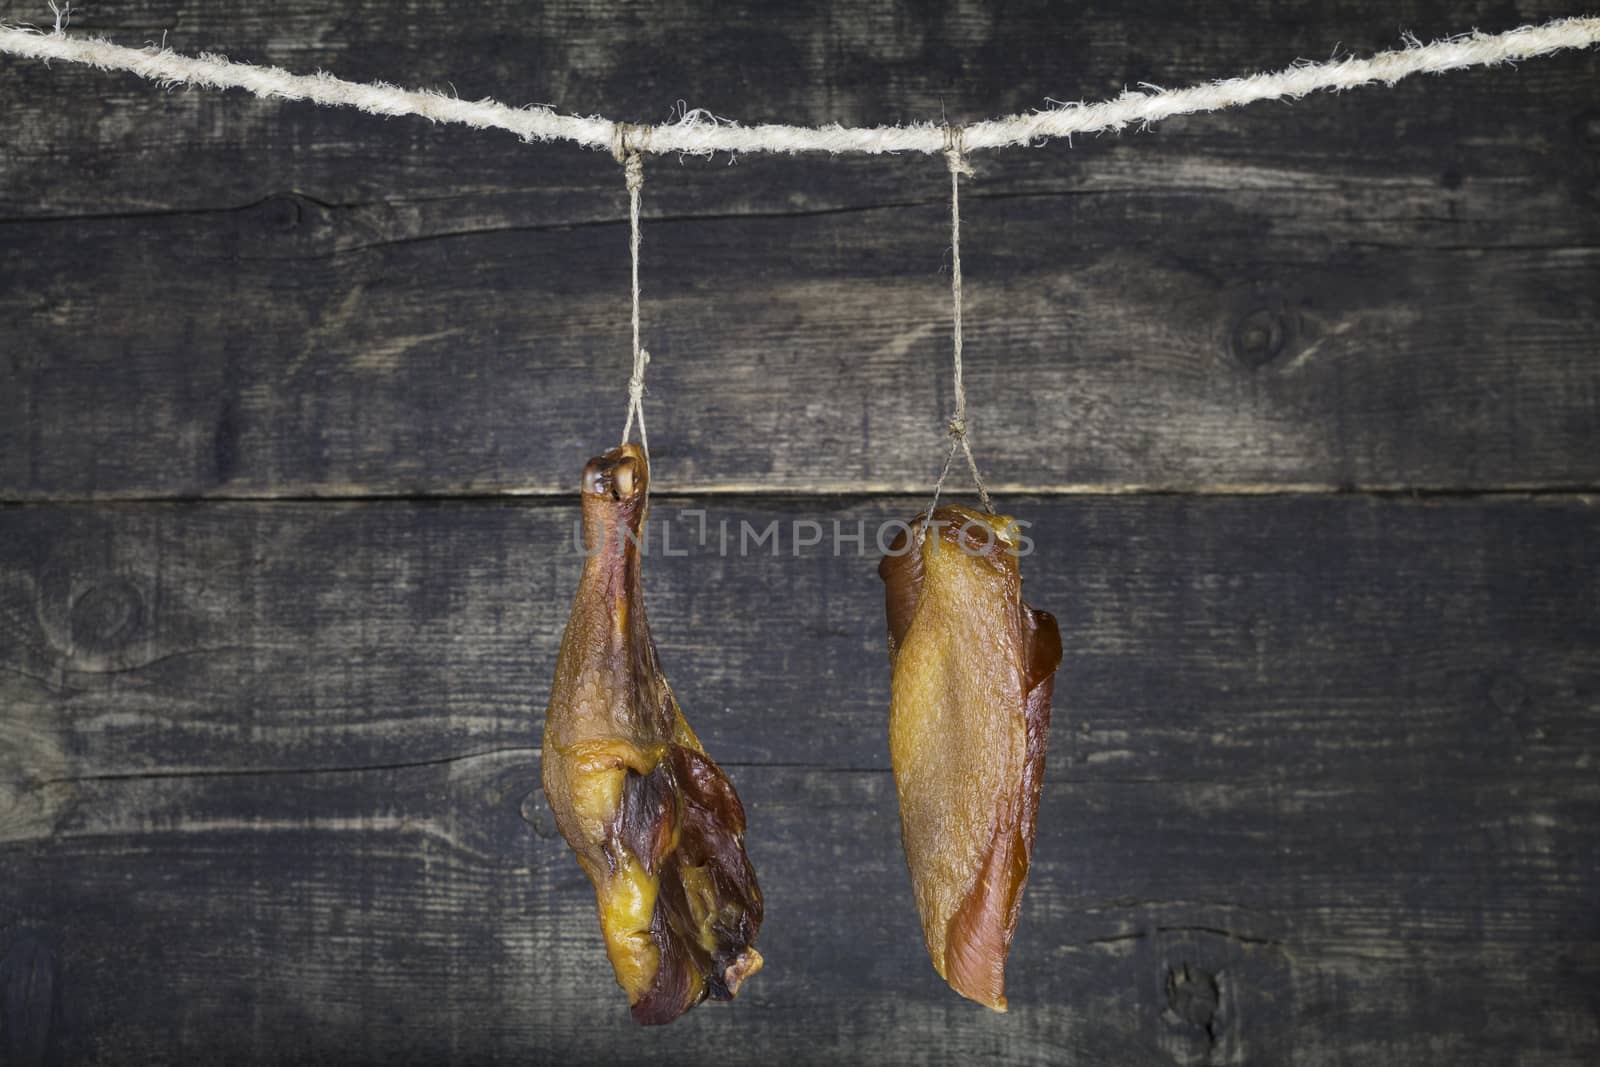 Smoked Chicken Meat Hanging on the Rope Against Wooden Background